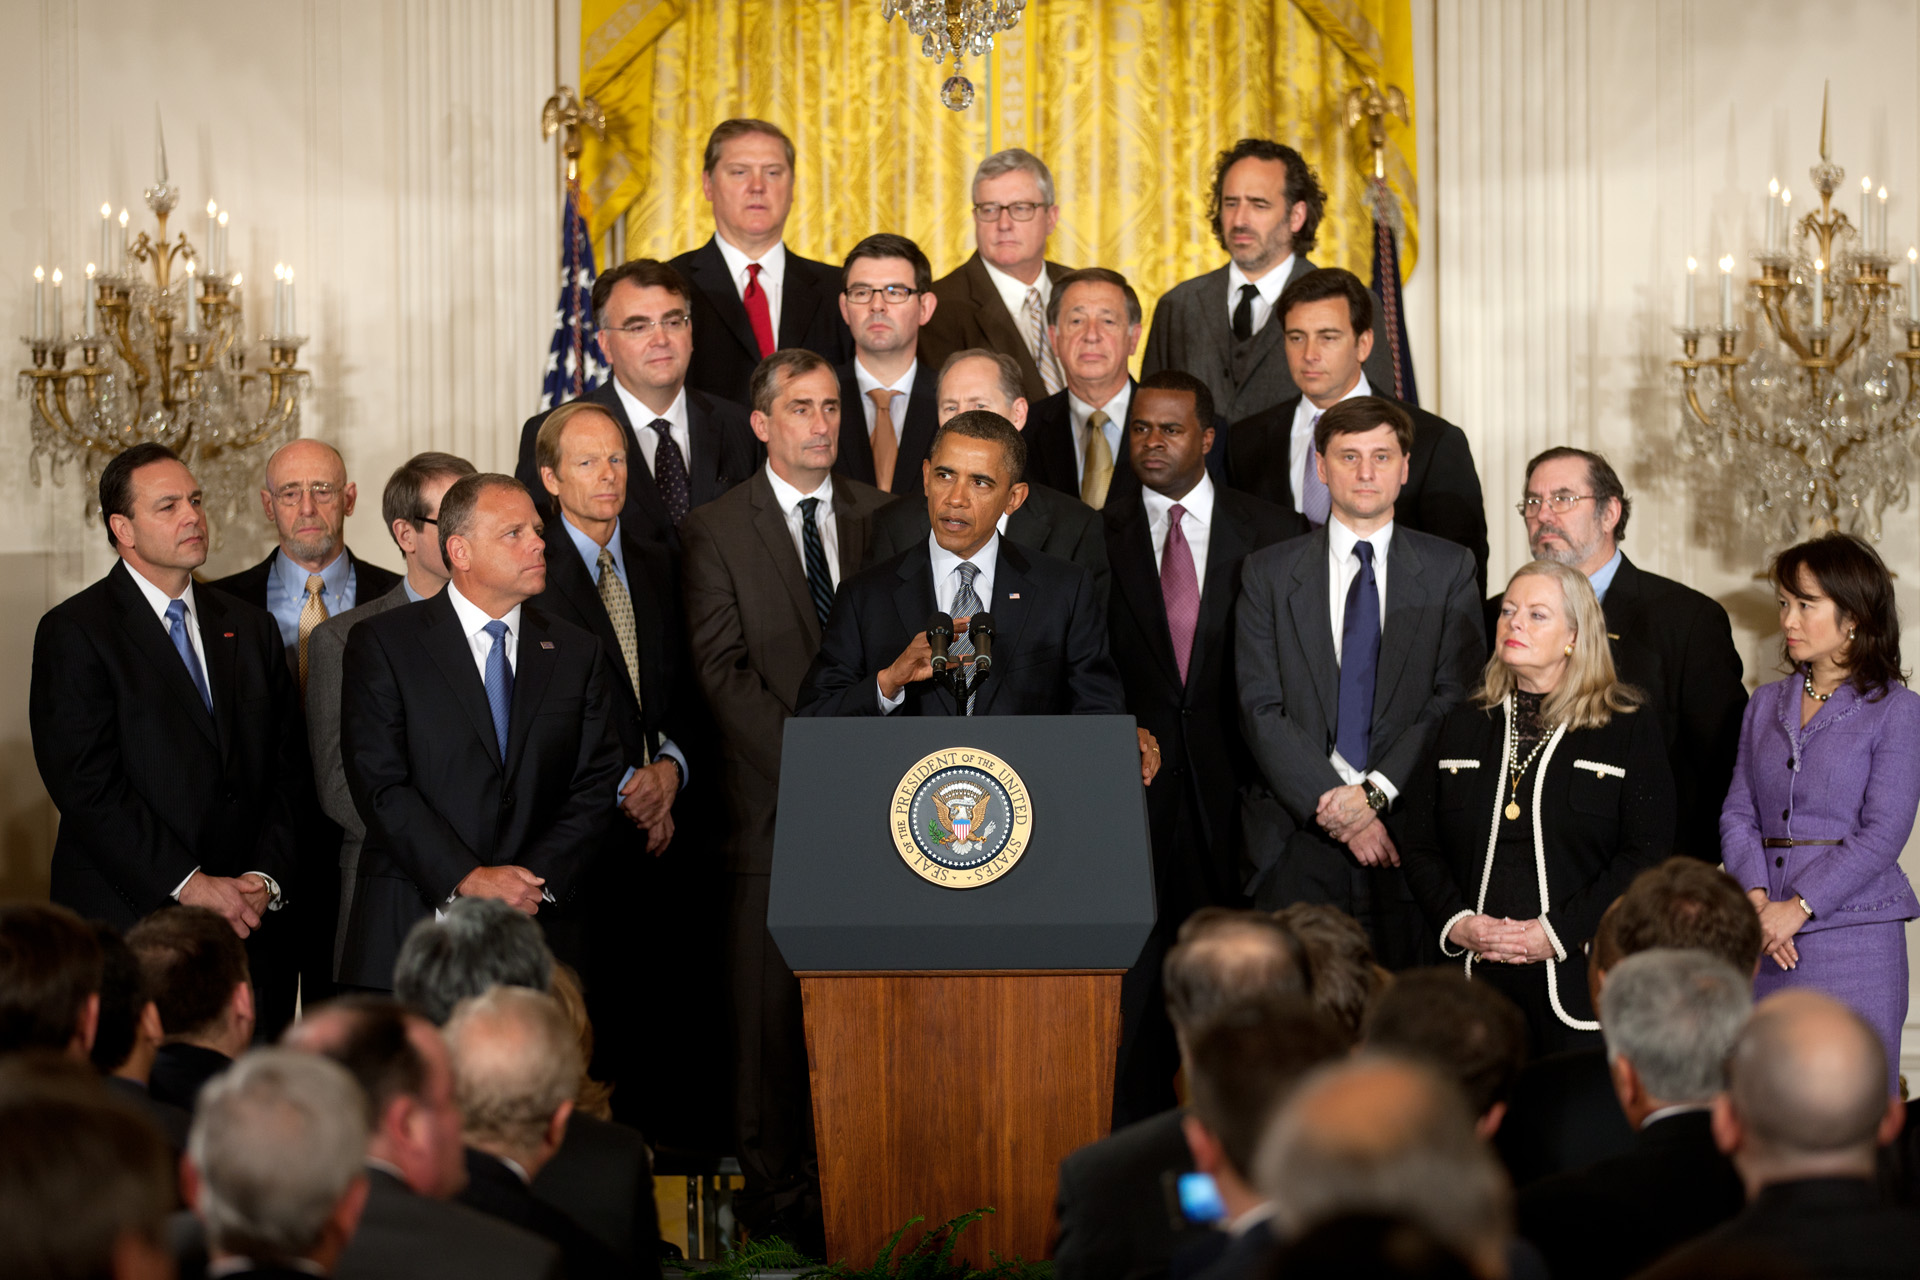 President Obama speaks at the Insourcing American Jobs forum (20120111)